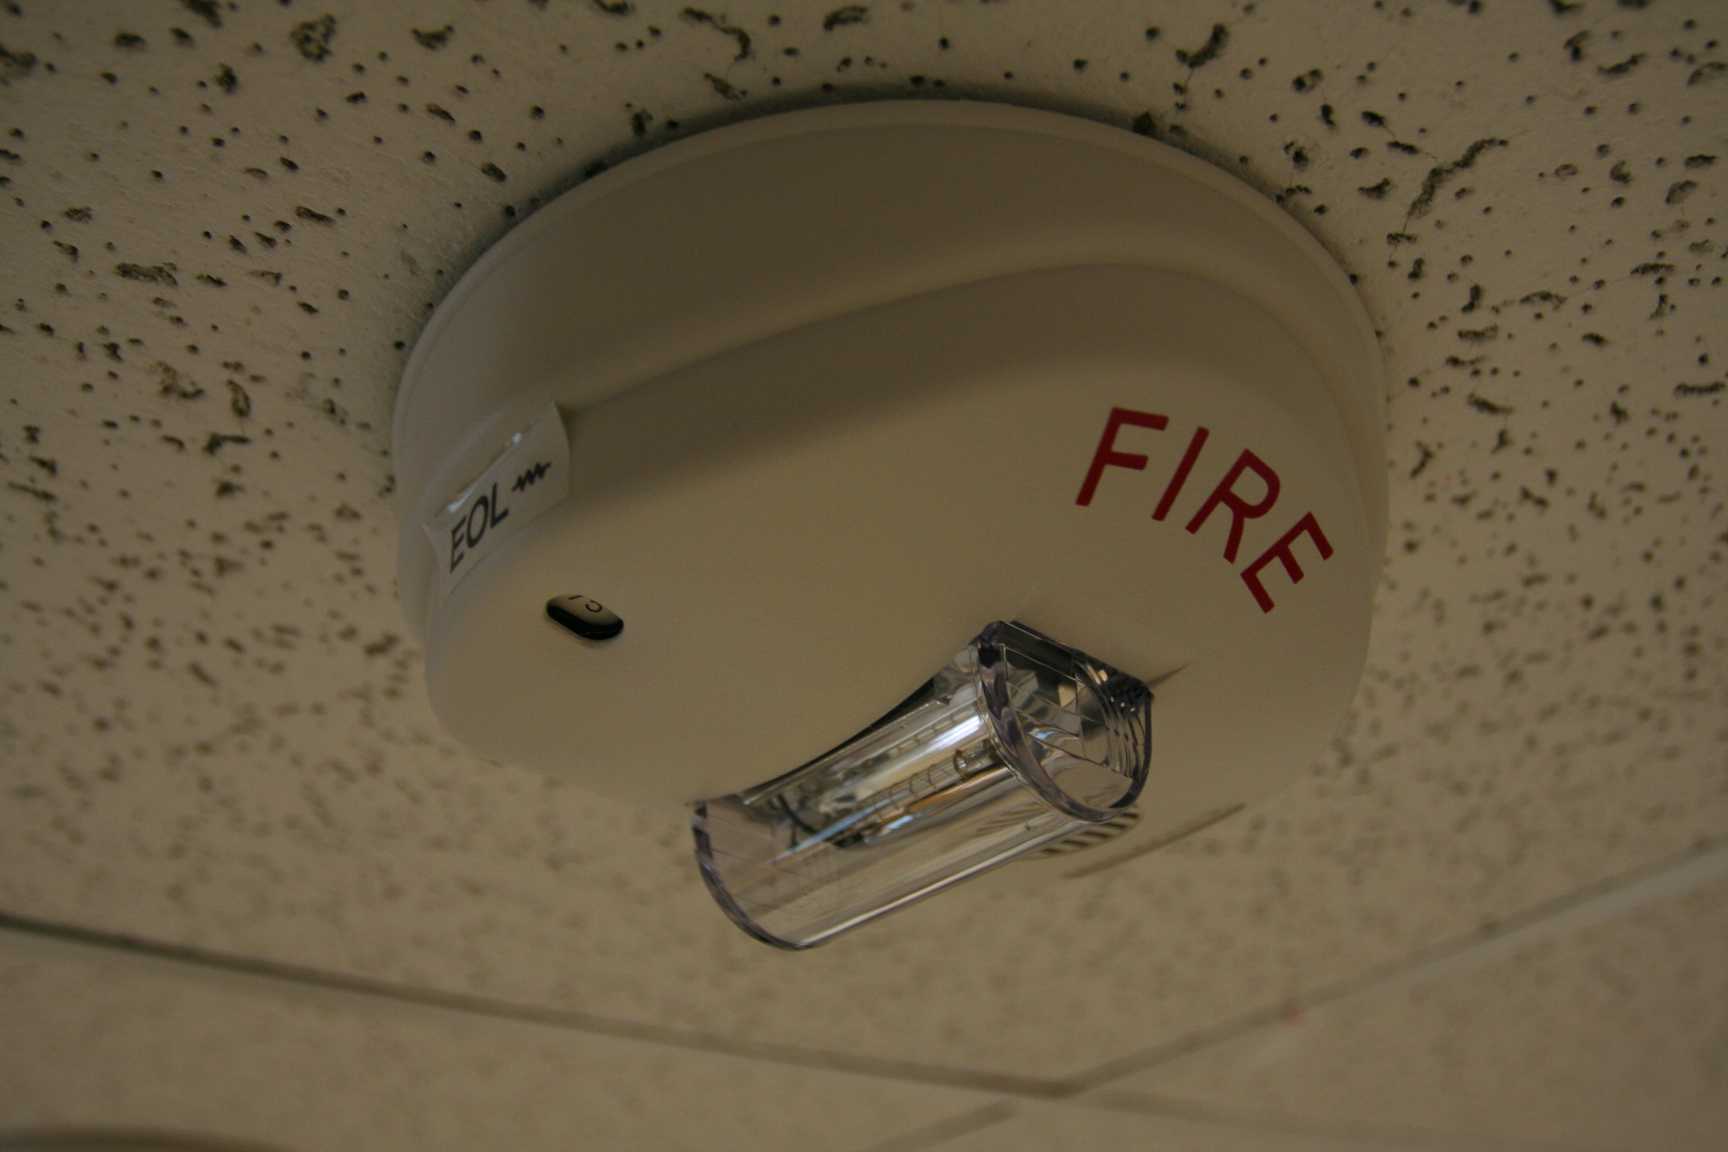 Chemistry experiment triggers fire alarms